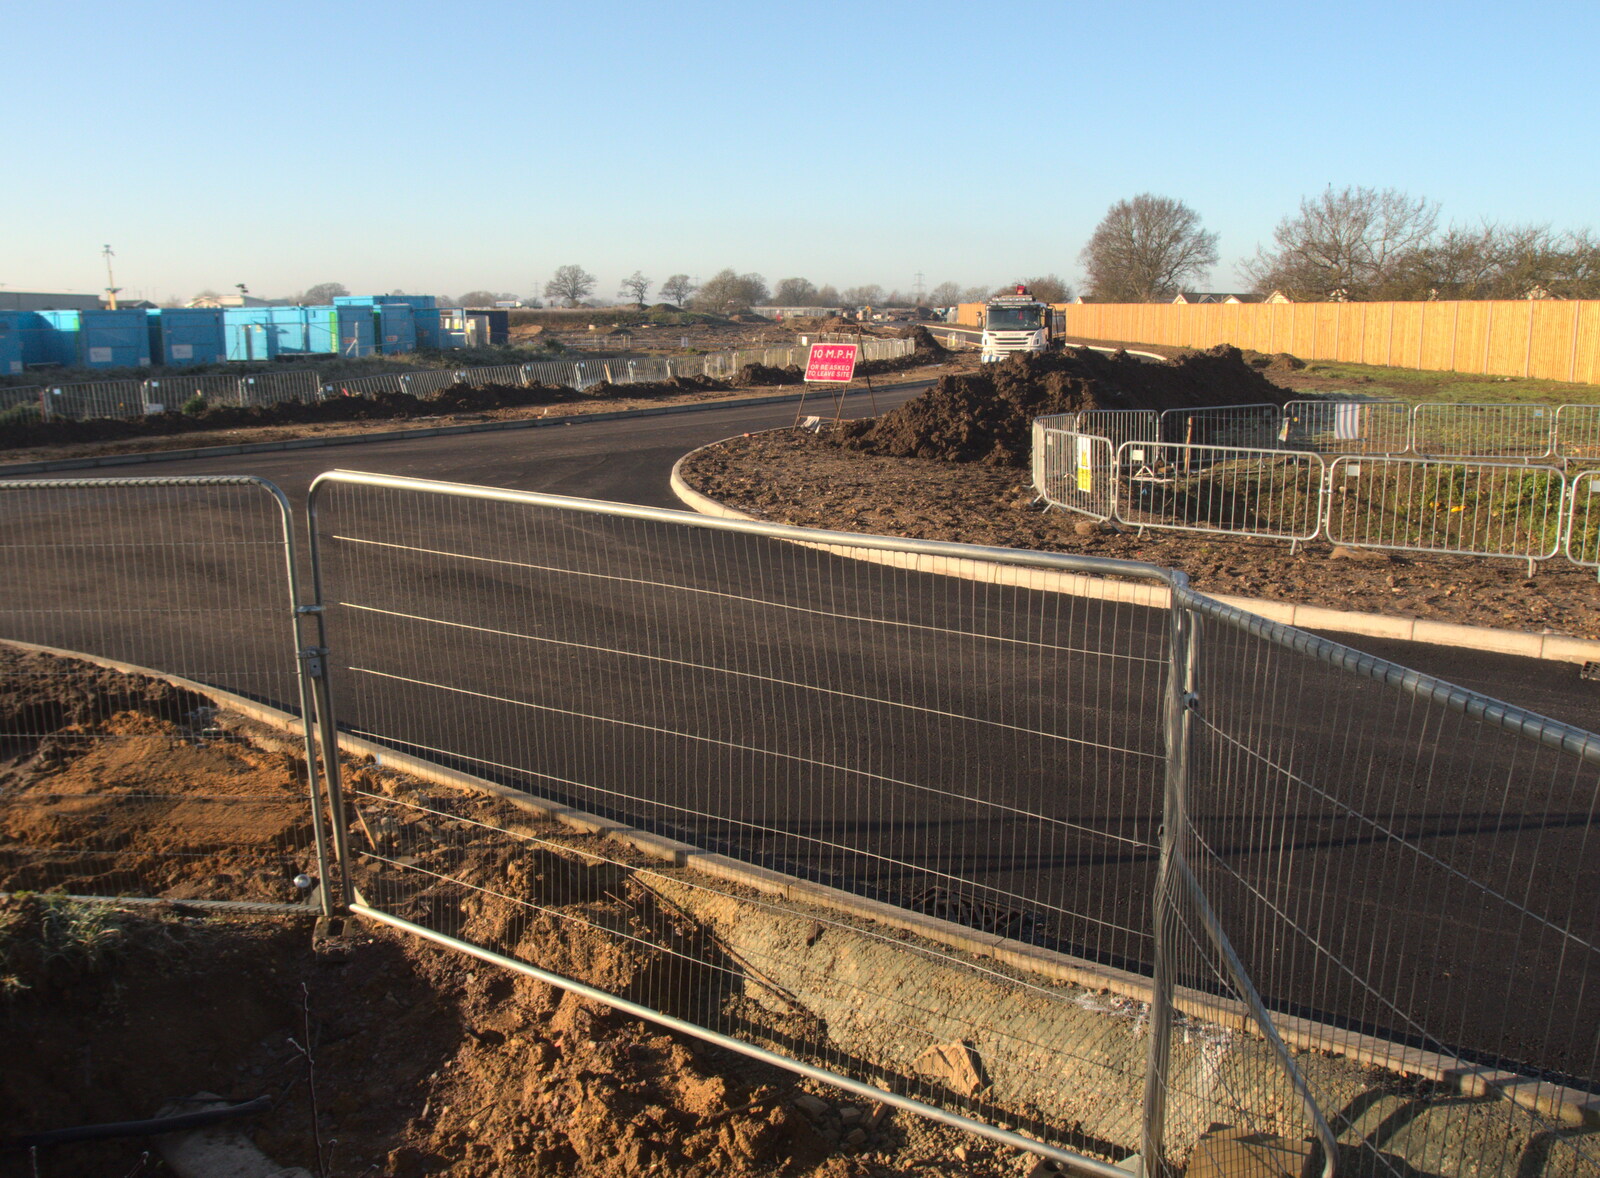 A view of the new road from Fun With Ice in Lockdown, Brome, Suffolk - 10th January 2021